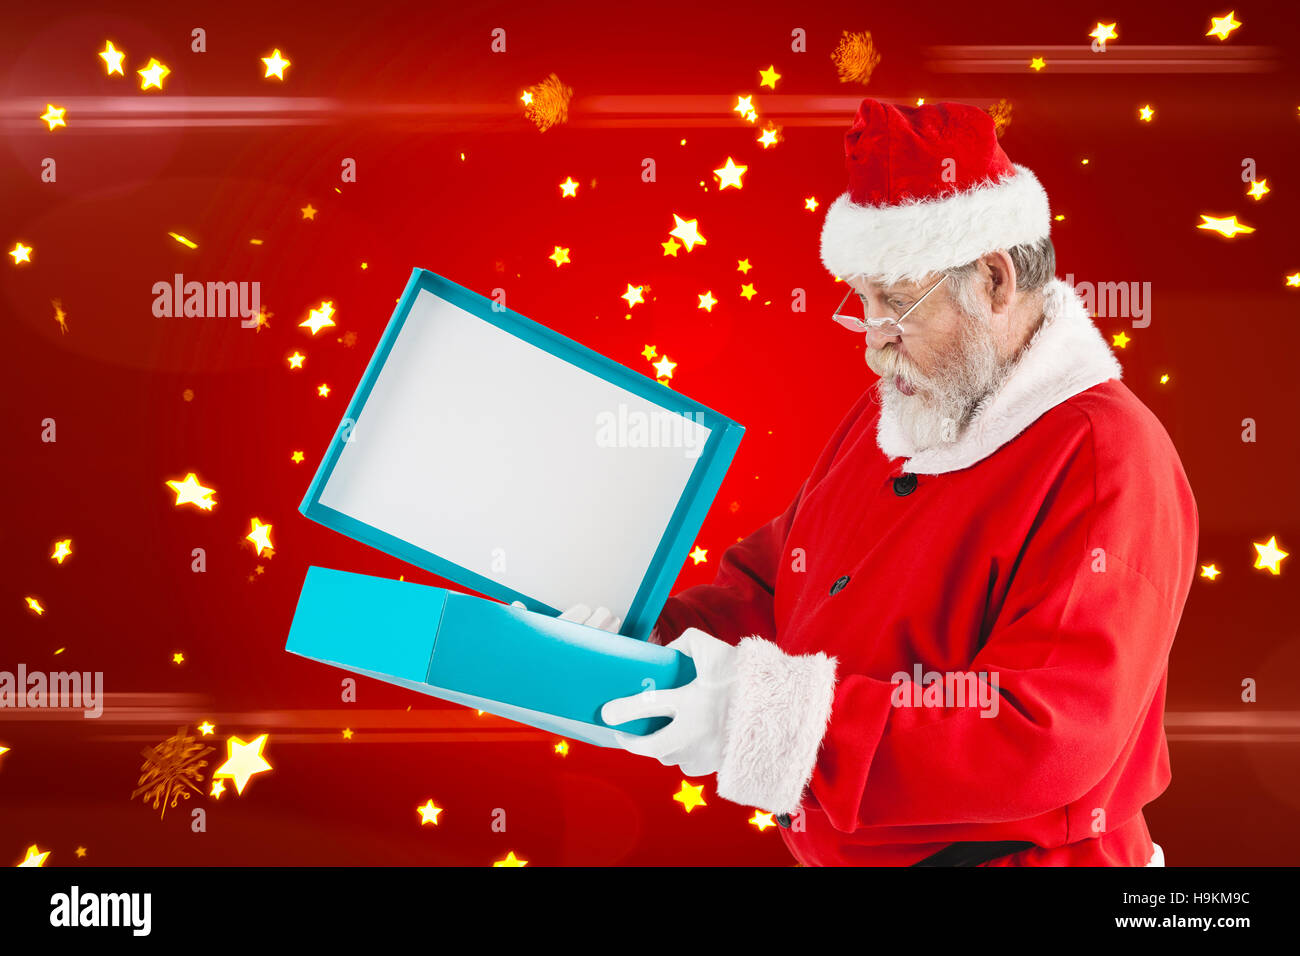 Composite image of santa claus opening gift box Stock Photo